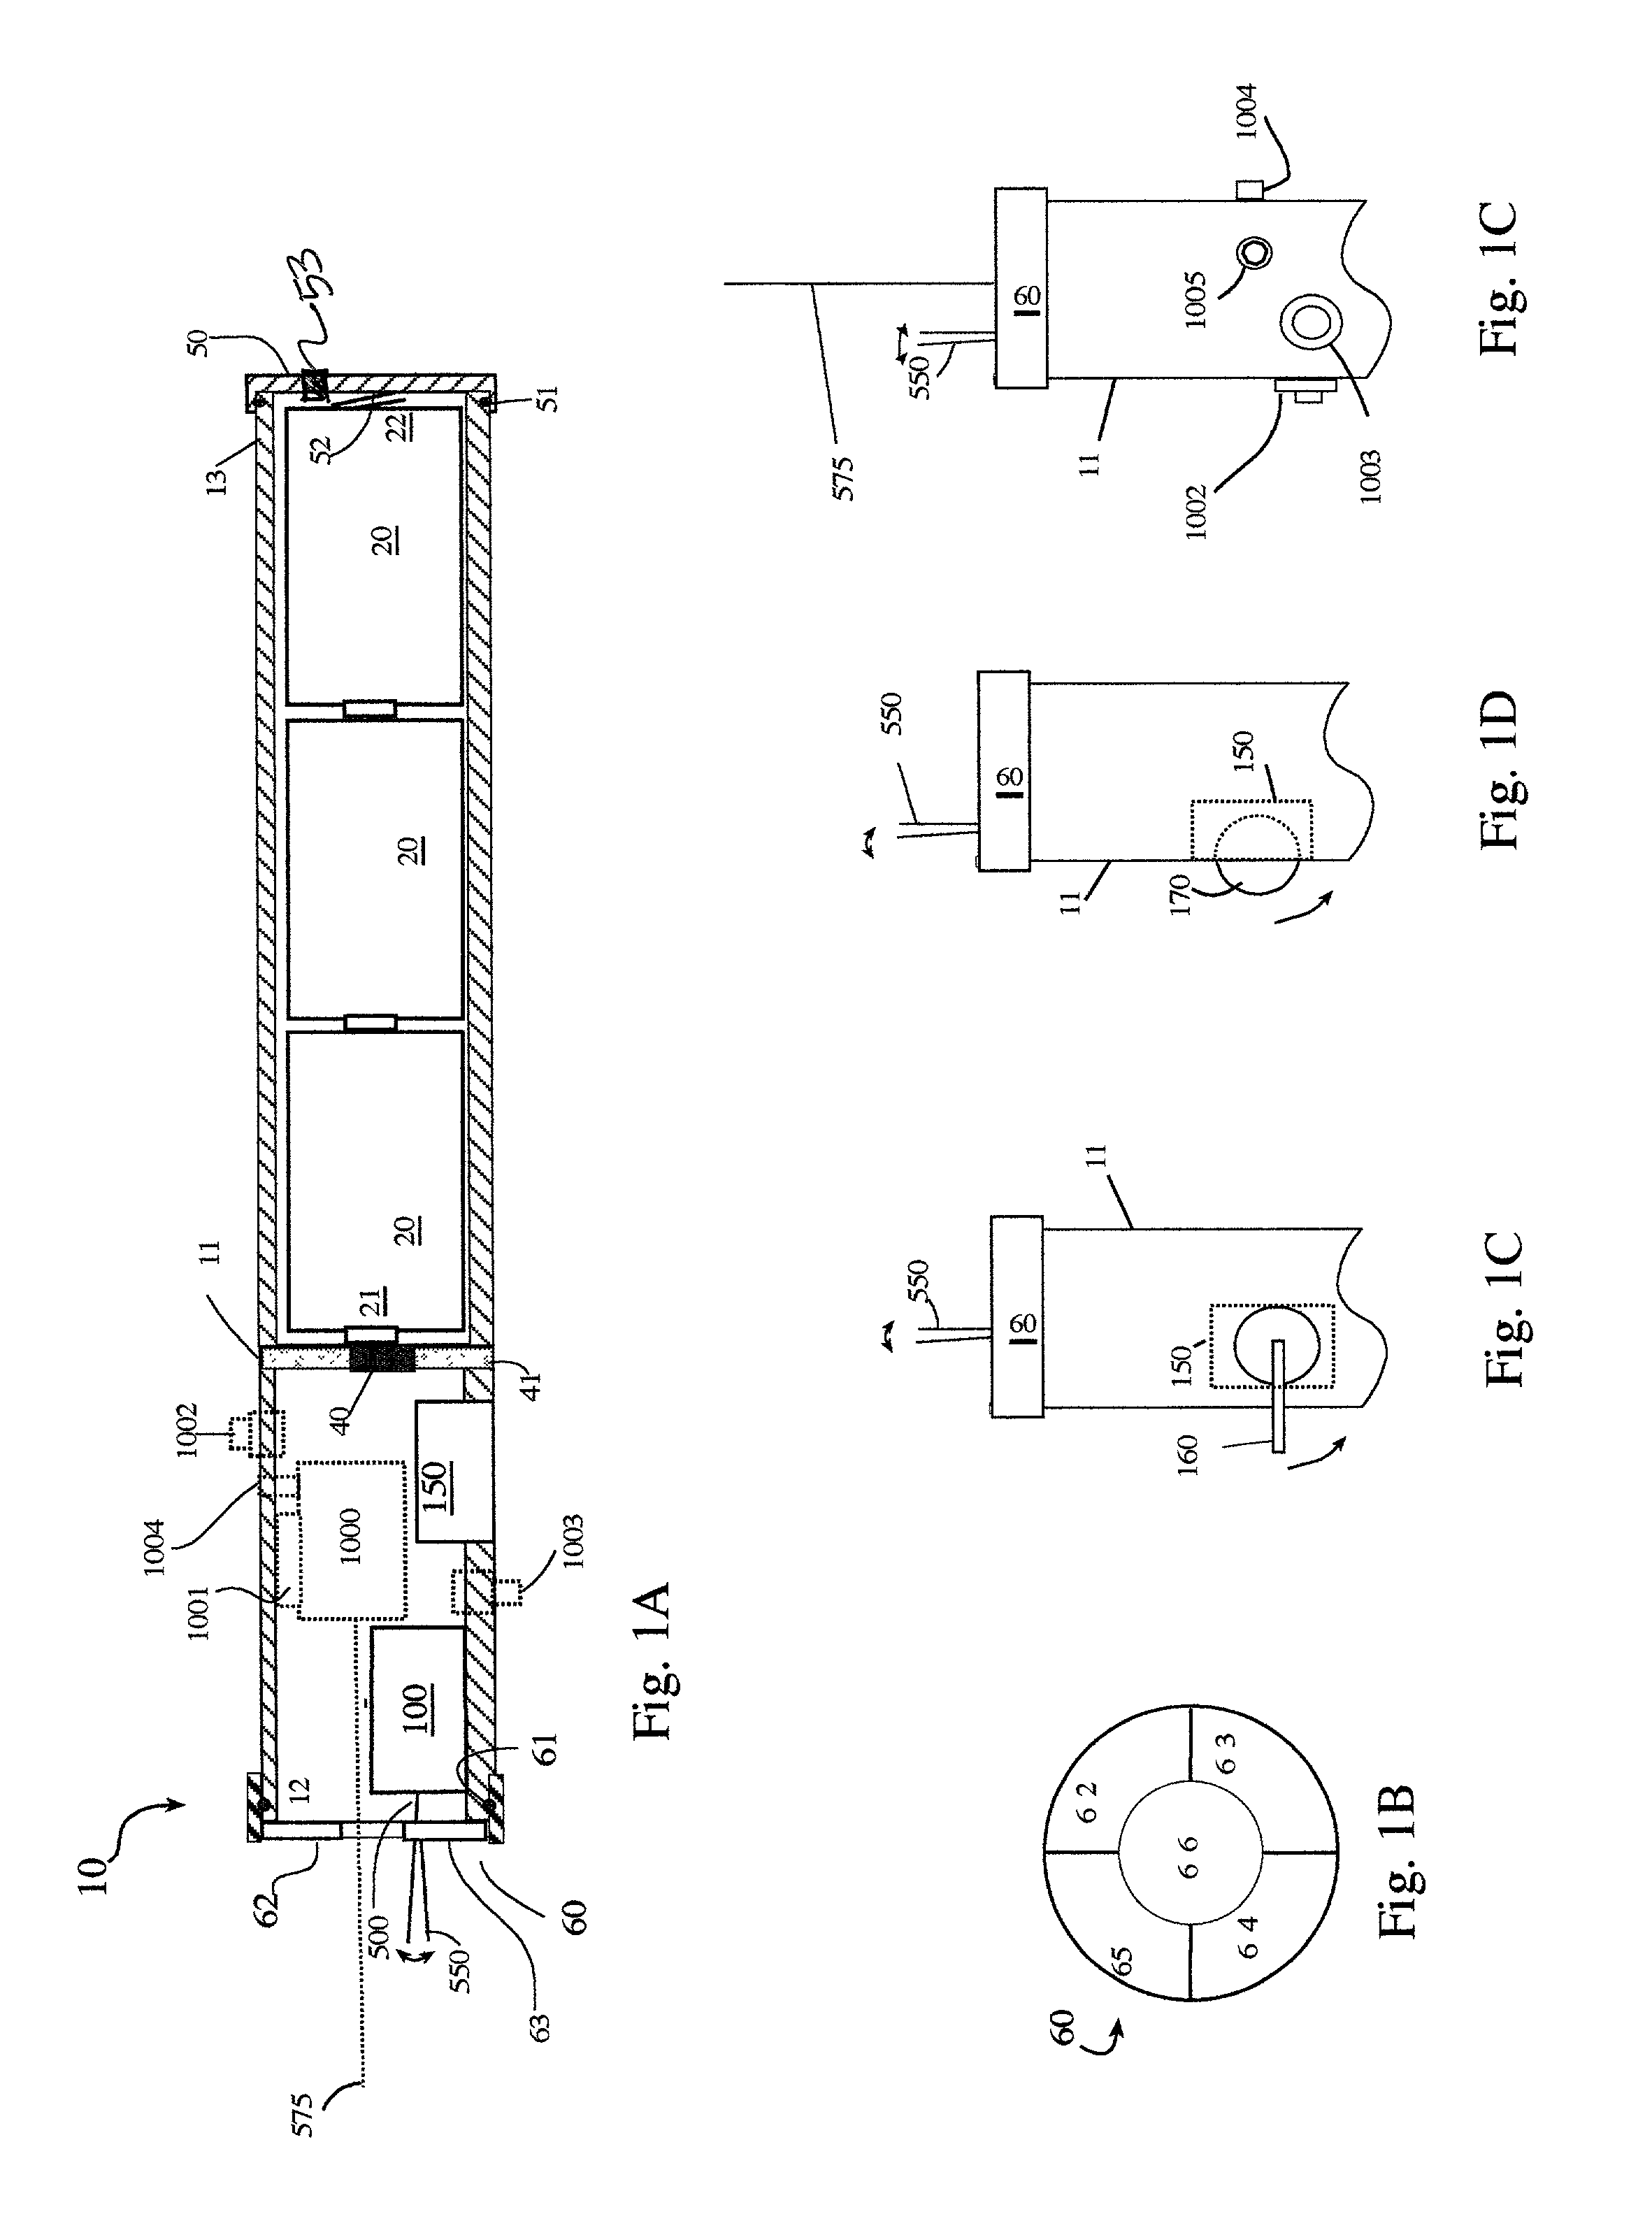 Variable output laser illuminator and targeting device